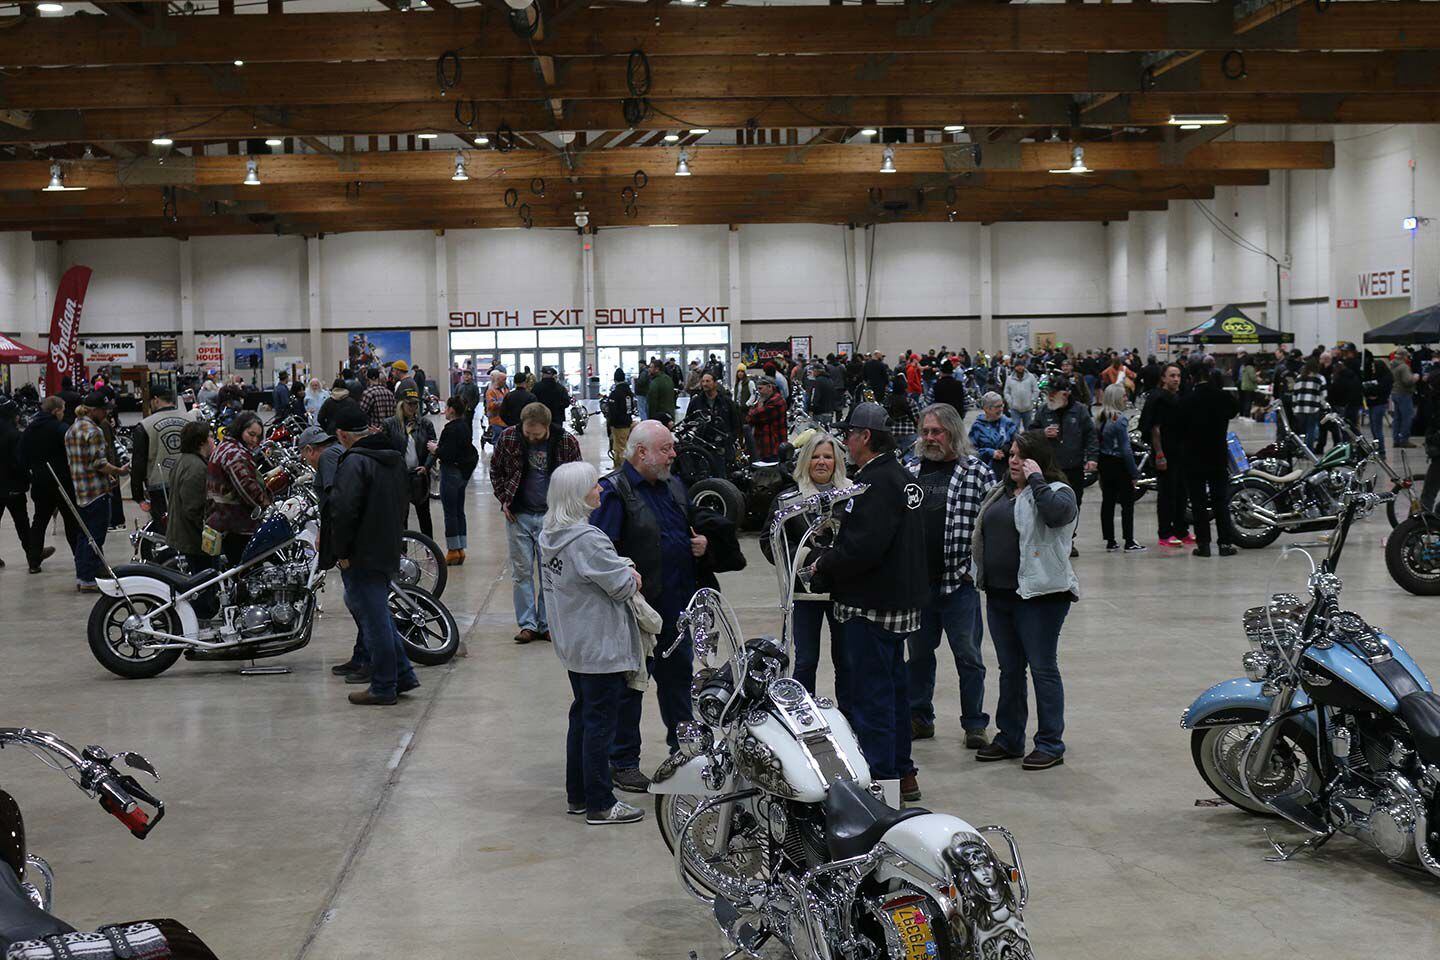 Custom motorcycles, live music, tattoo artists, vendors—the Cherry City Classic featured plenty of much-needed biker fun.